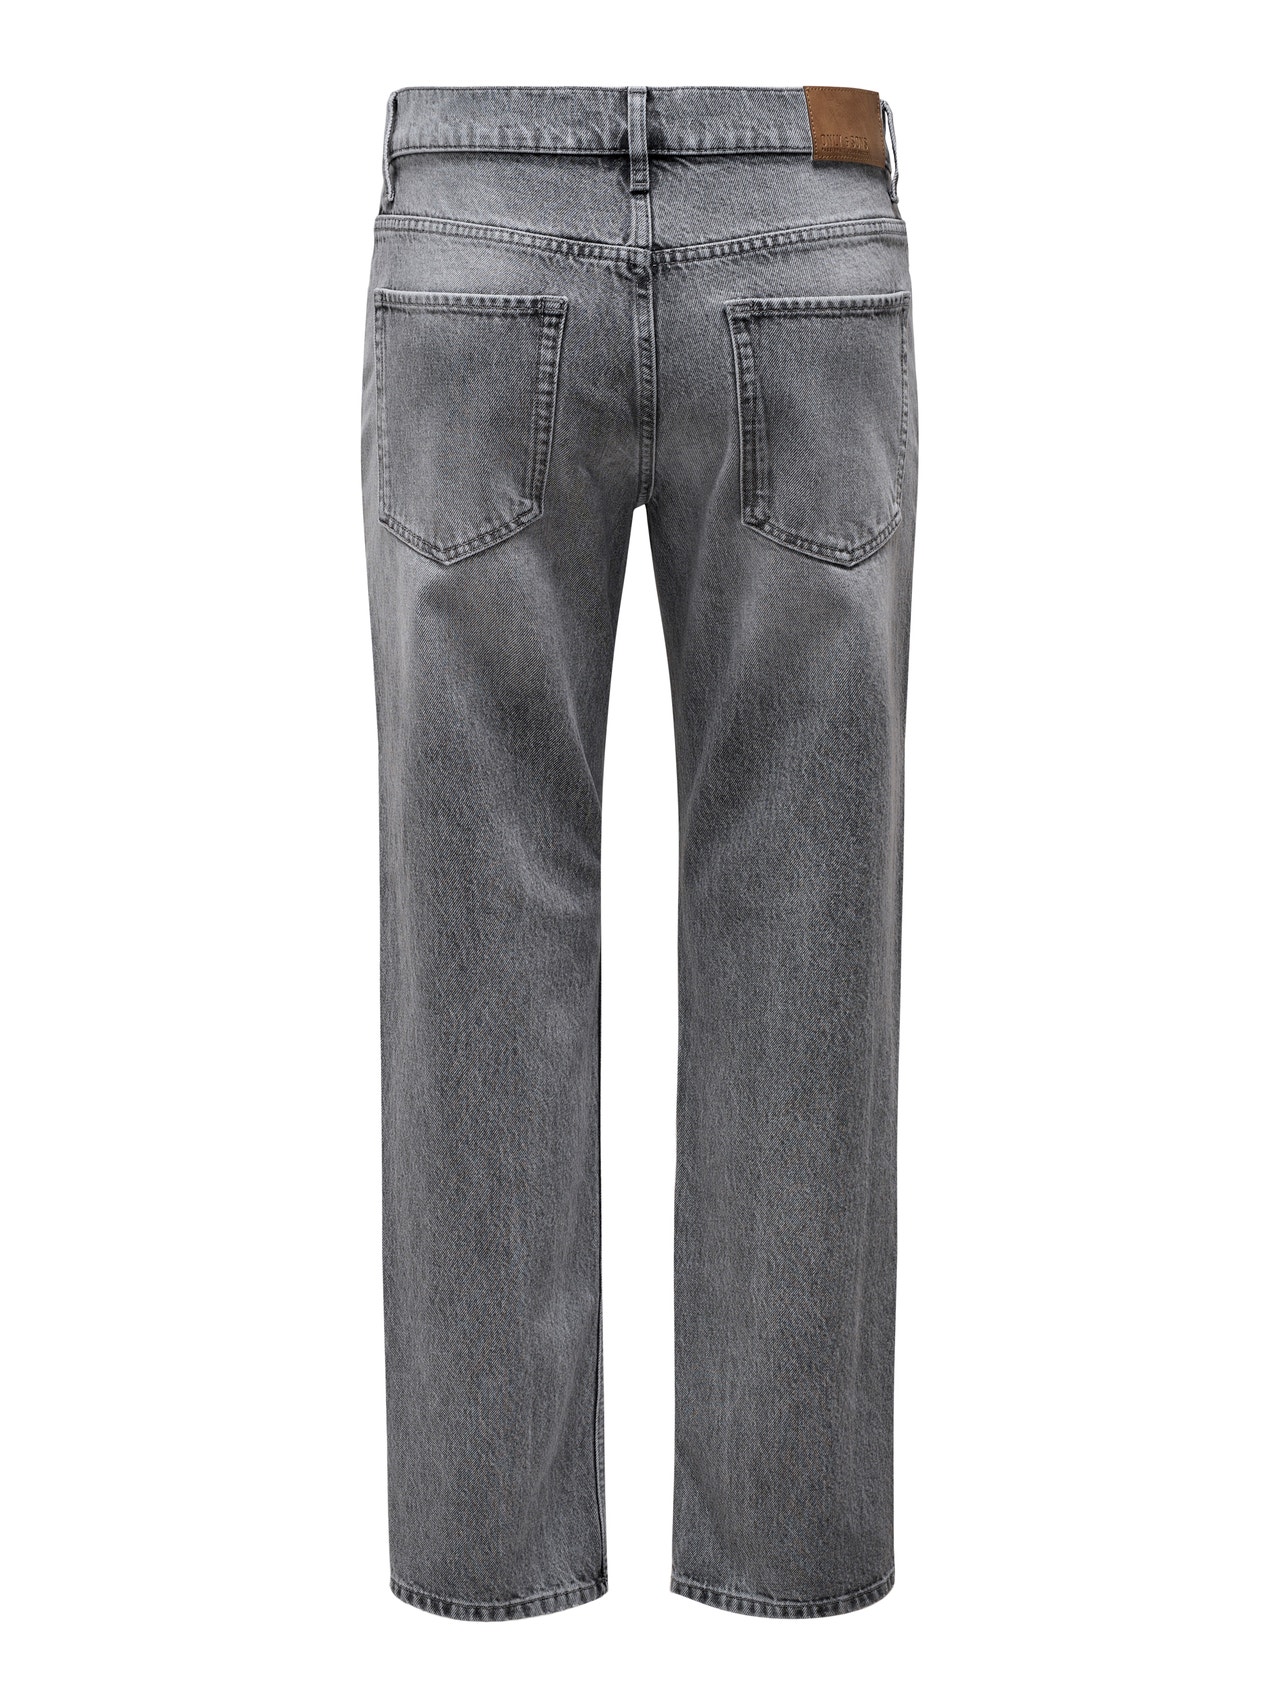 ONLY & SONS Straight Fit Mid rise Jeans -Medium Grey Denim - 22028202